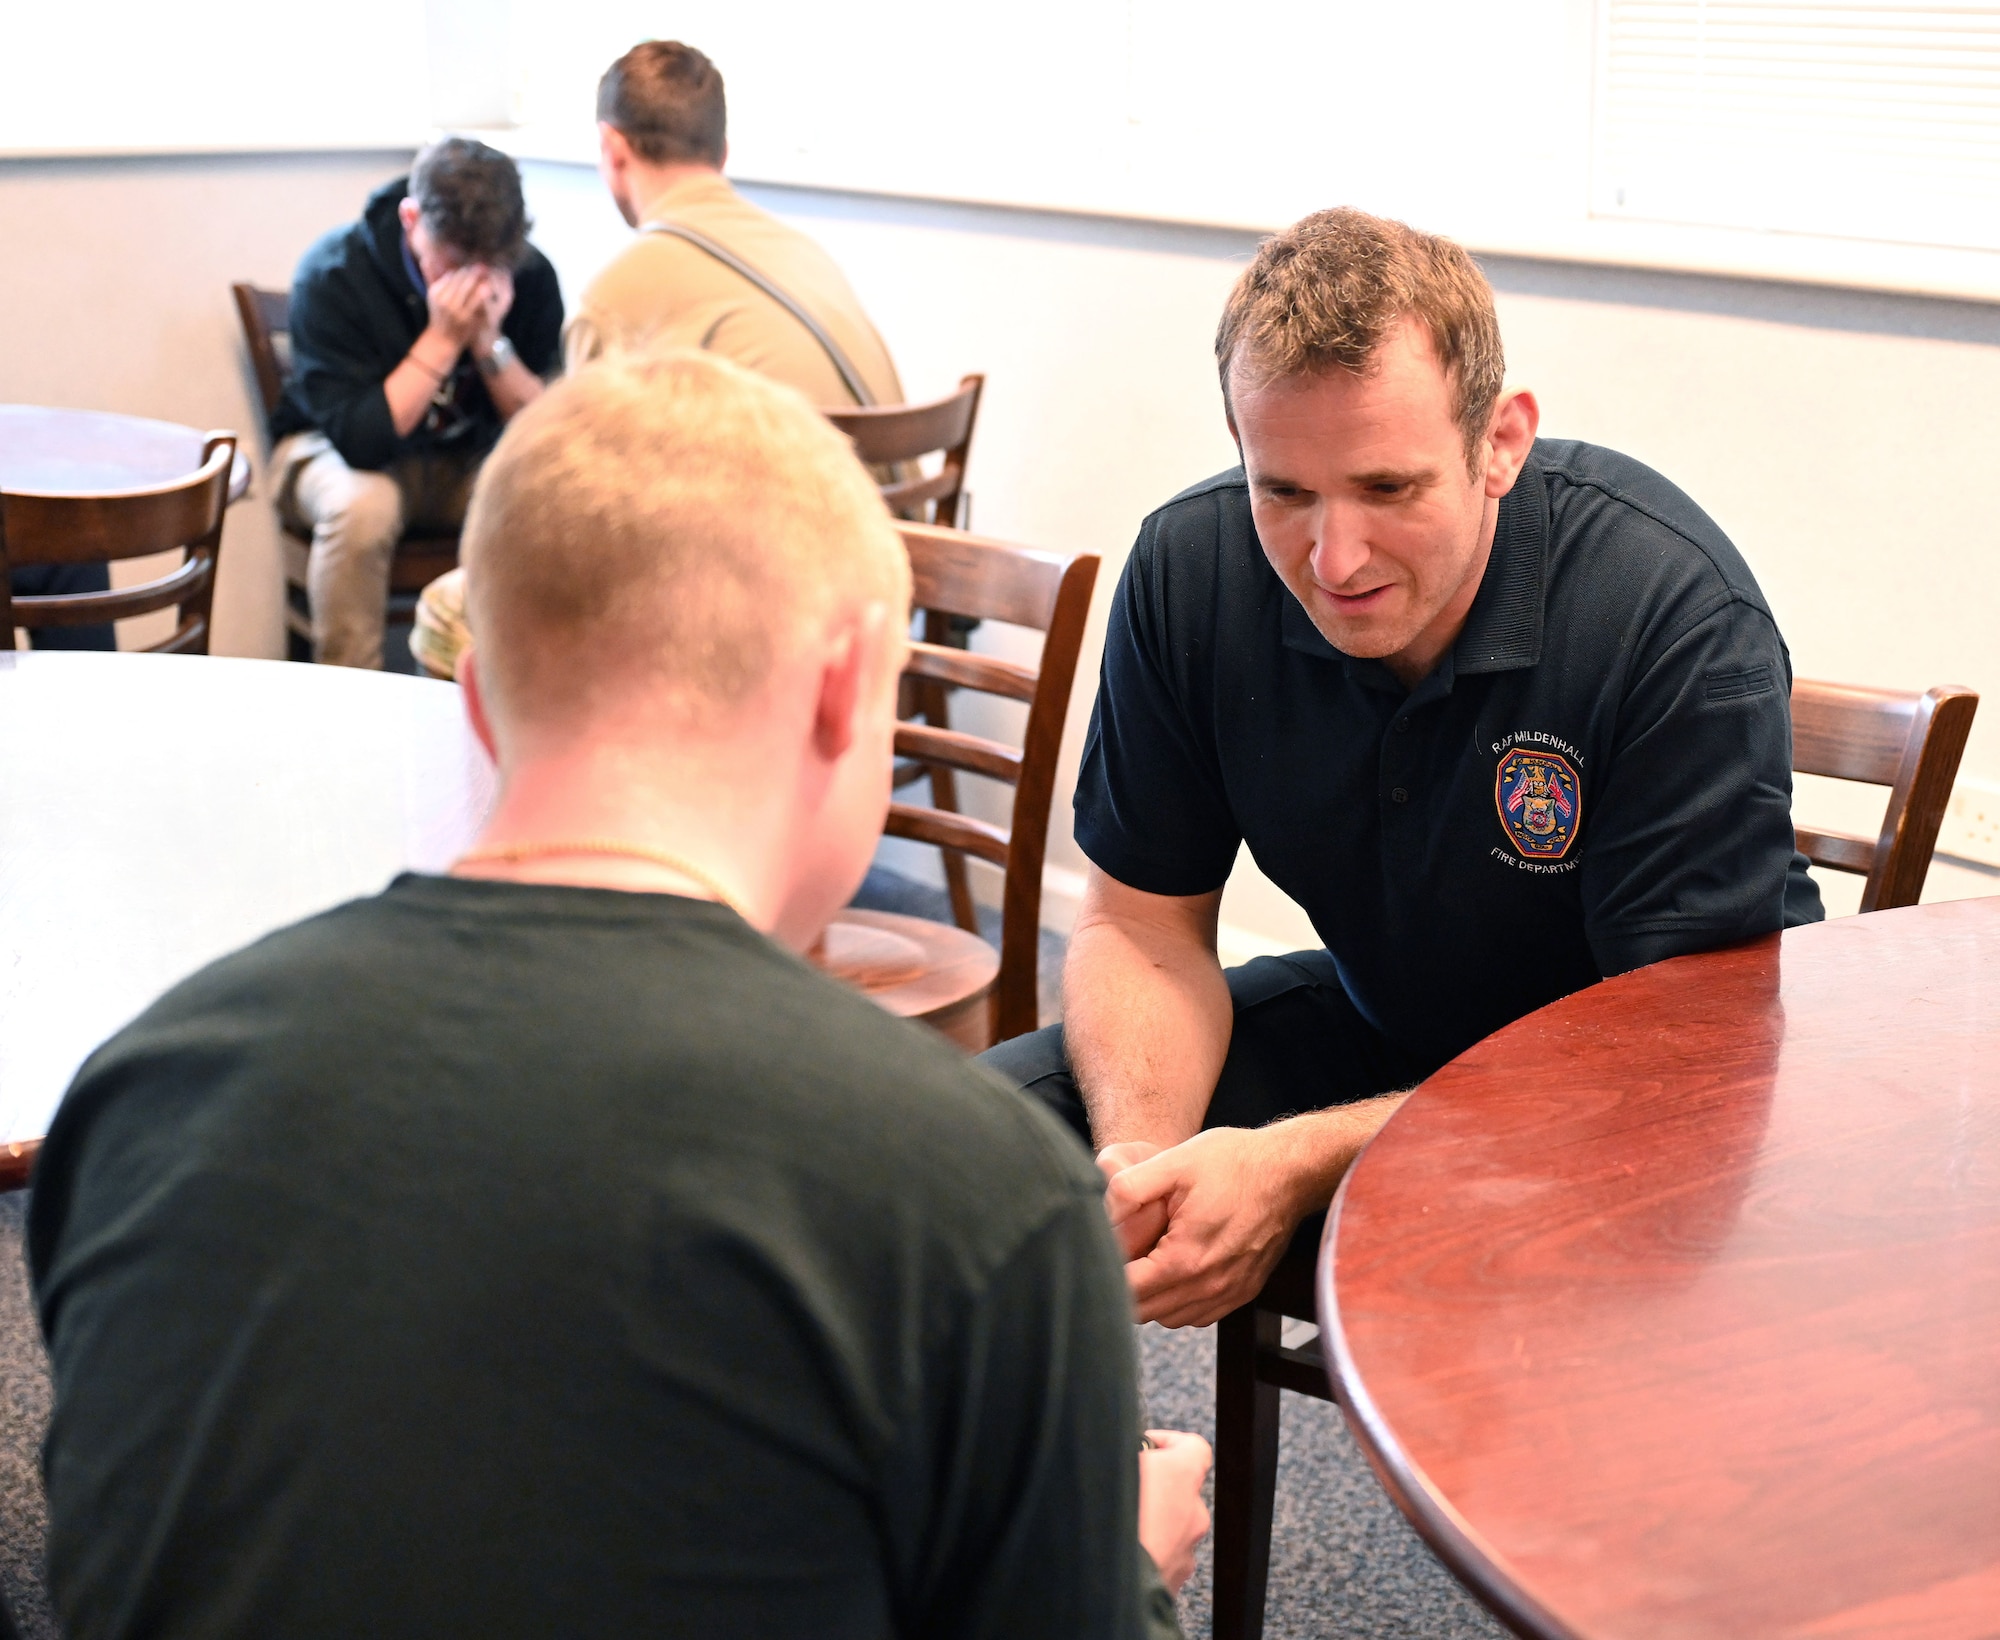 U.S. Air Force Airmen from the 100th Security Forces Squadron, and British civilian firefighters and Airmen from the 100th Civil Engineer Squadron Fire Department, role play during an interactive session as part of a two-day Mental Health First Aider course at Royal Air Force Mildenhall, England, June 27, 2023. Attendees took turns playing the role of both a person dealing with mental health issues and someone listening and helping them talk through their fears and concerns, in a variety of scenarios. First responders from both squadrons attended the training to help provide them the knowledge and confidence to help assist someone experiencing a mental health breakdown, challenge or crisis that they may be responding to or involved with. (U.S. Air Force photo by Karen Abeyasekere)